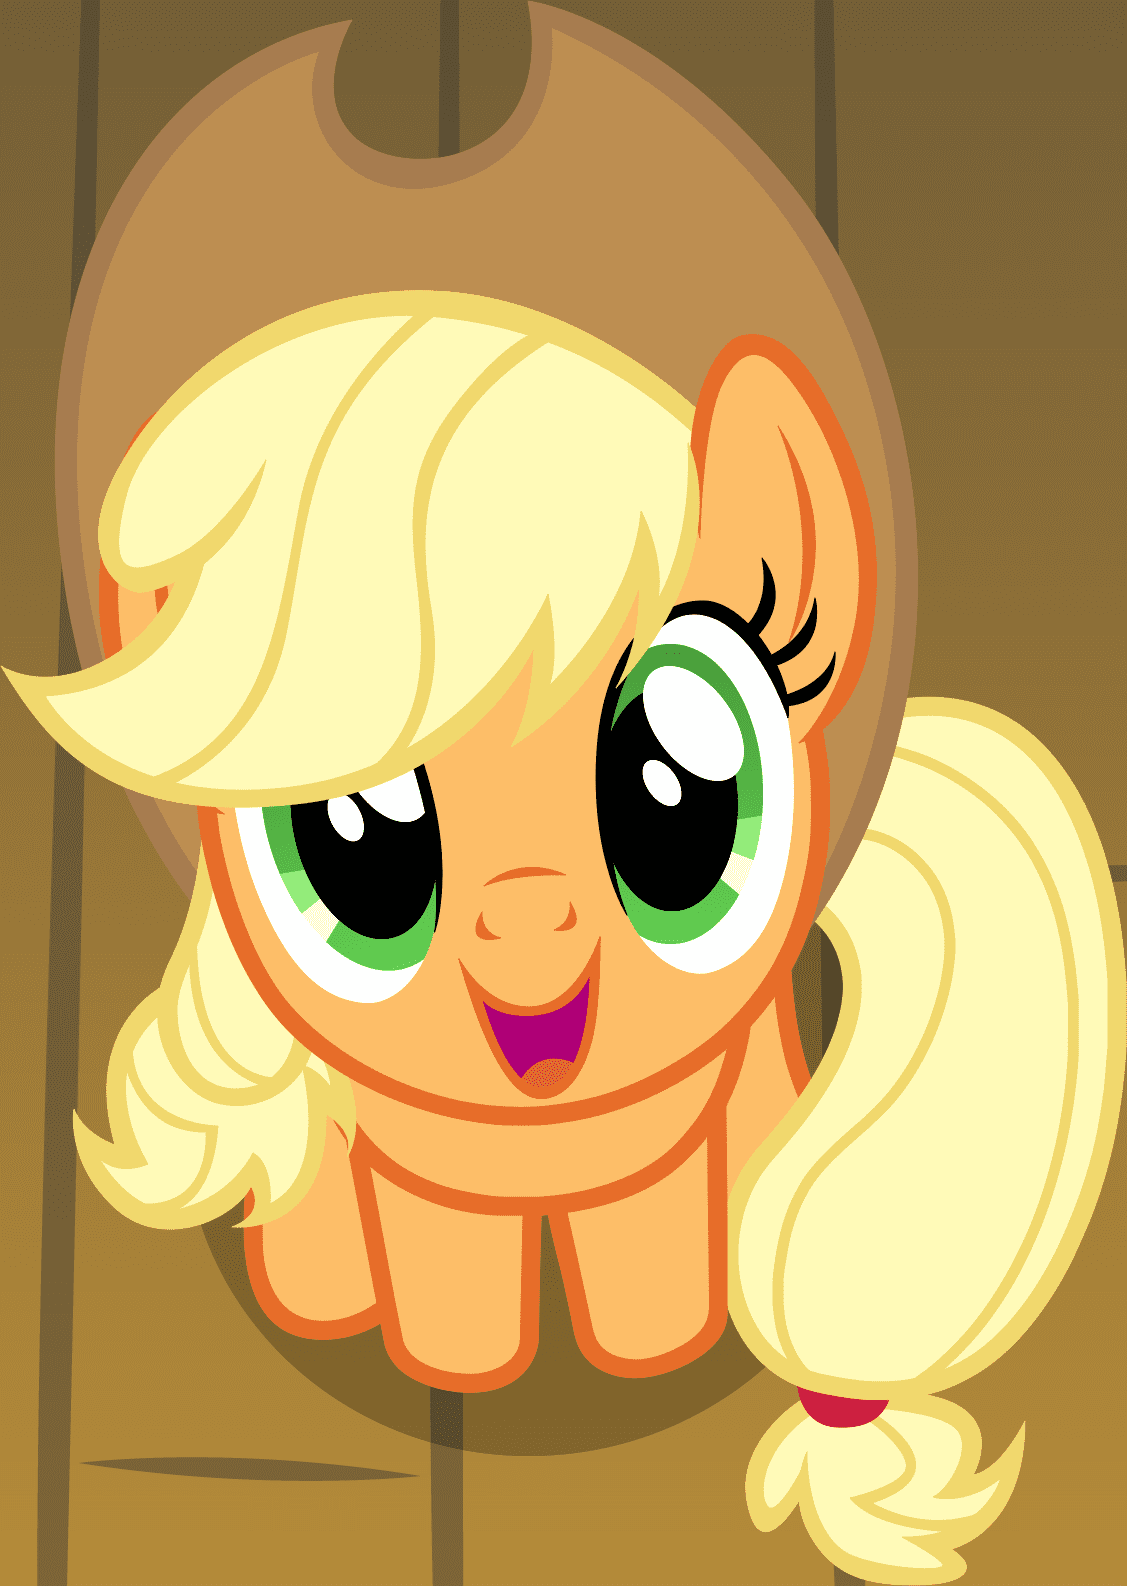 1100843__safe_solo_applejack_smiling_cute_looking+at+you_sitting_grin_happy_looking+up.png